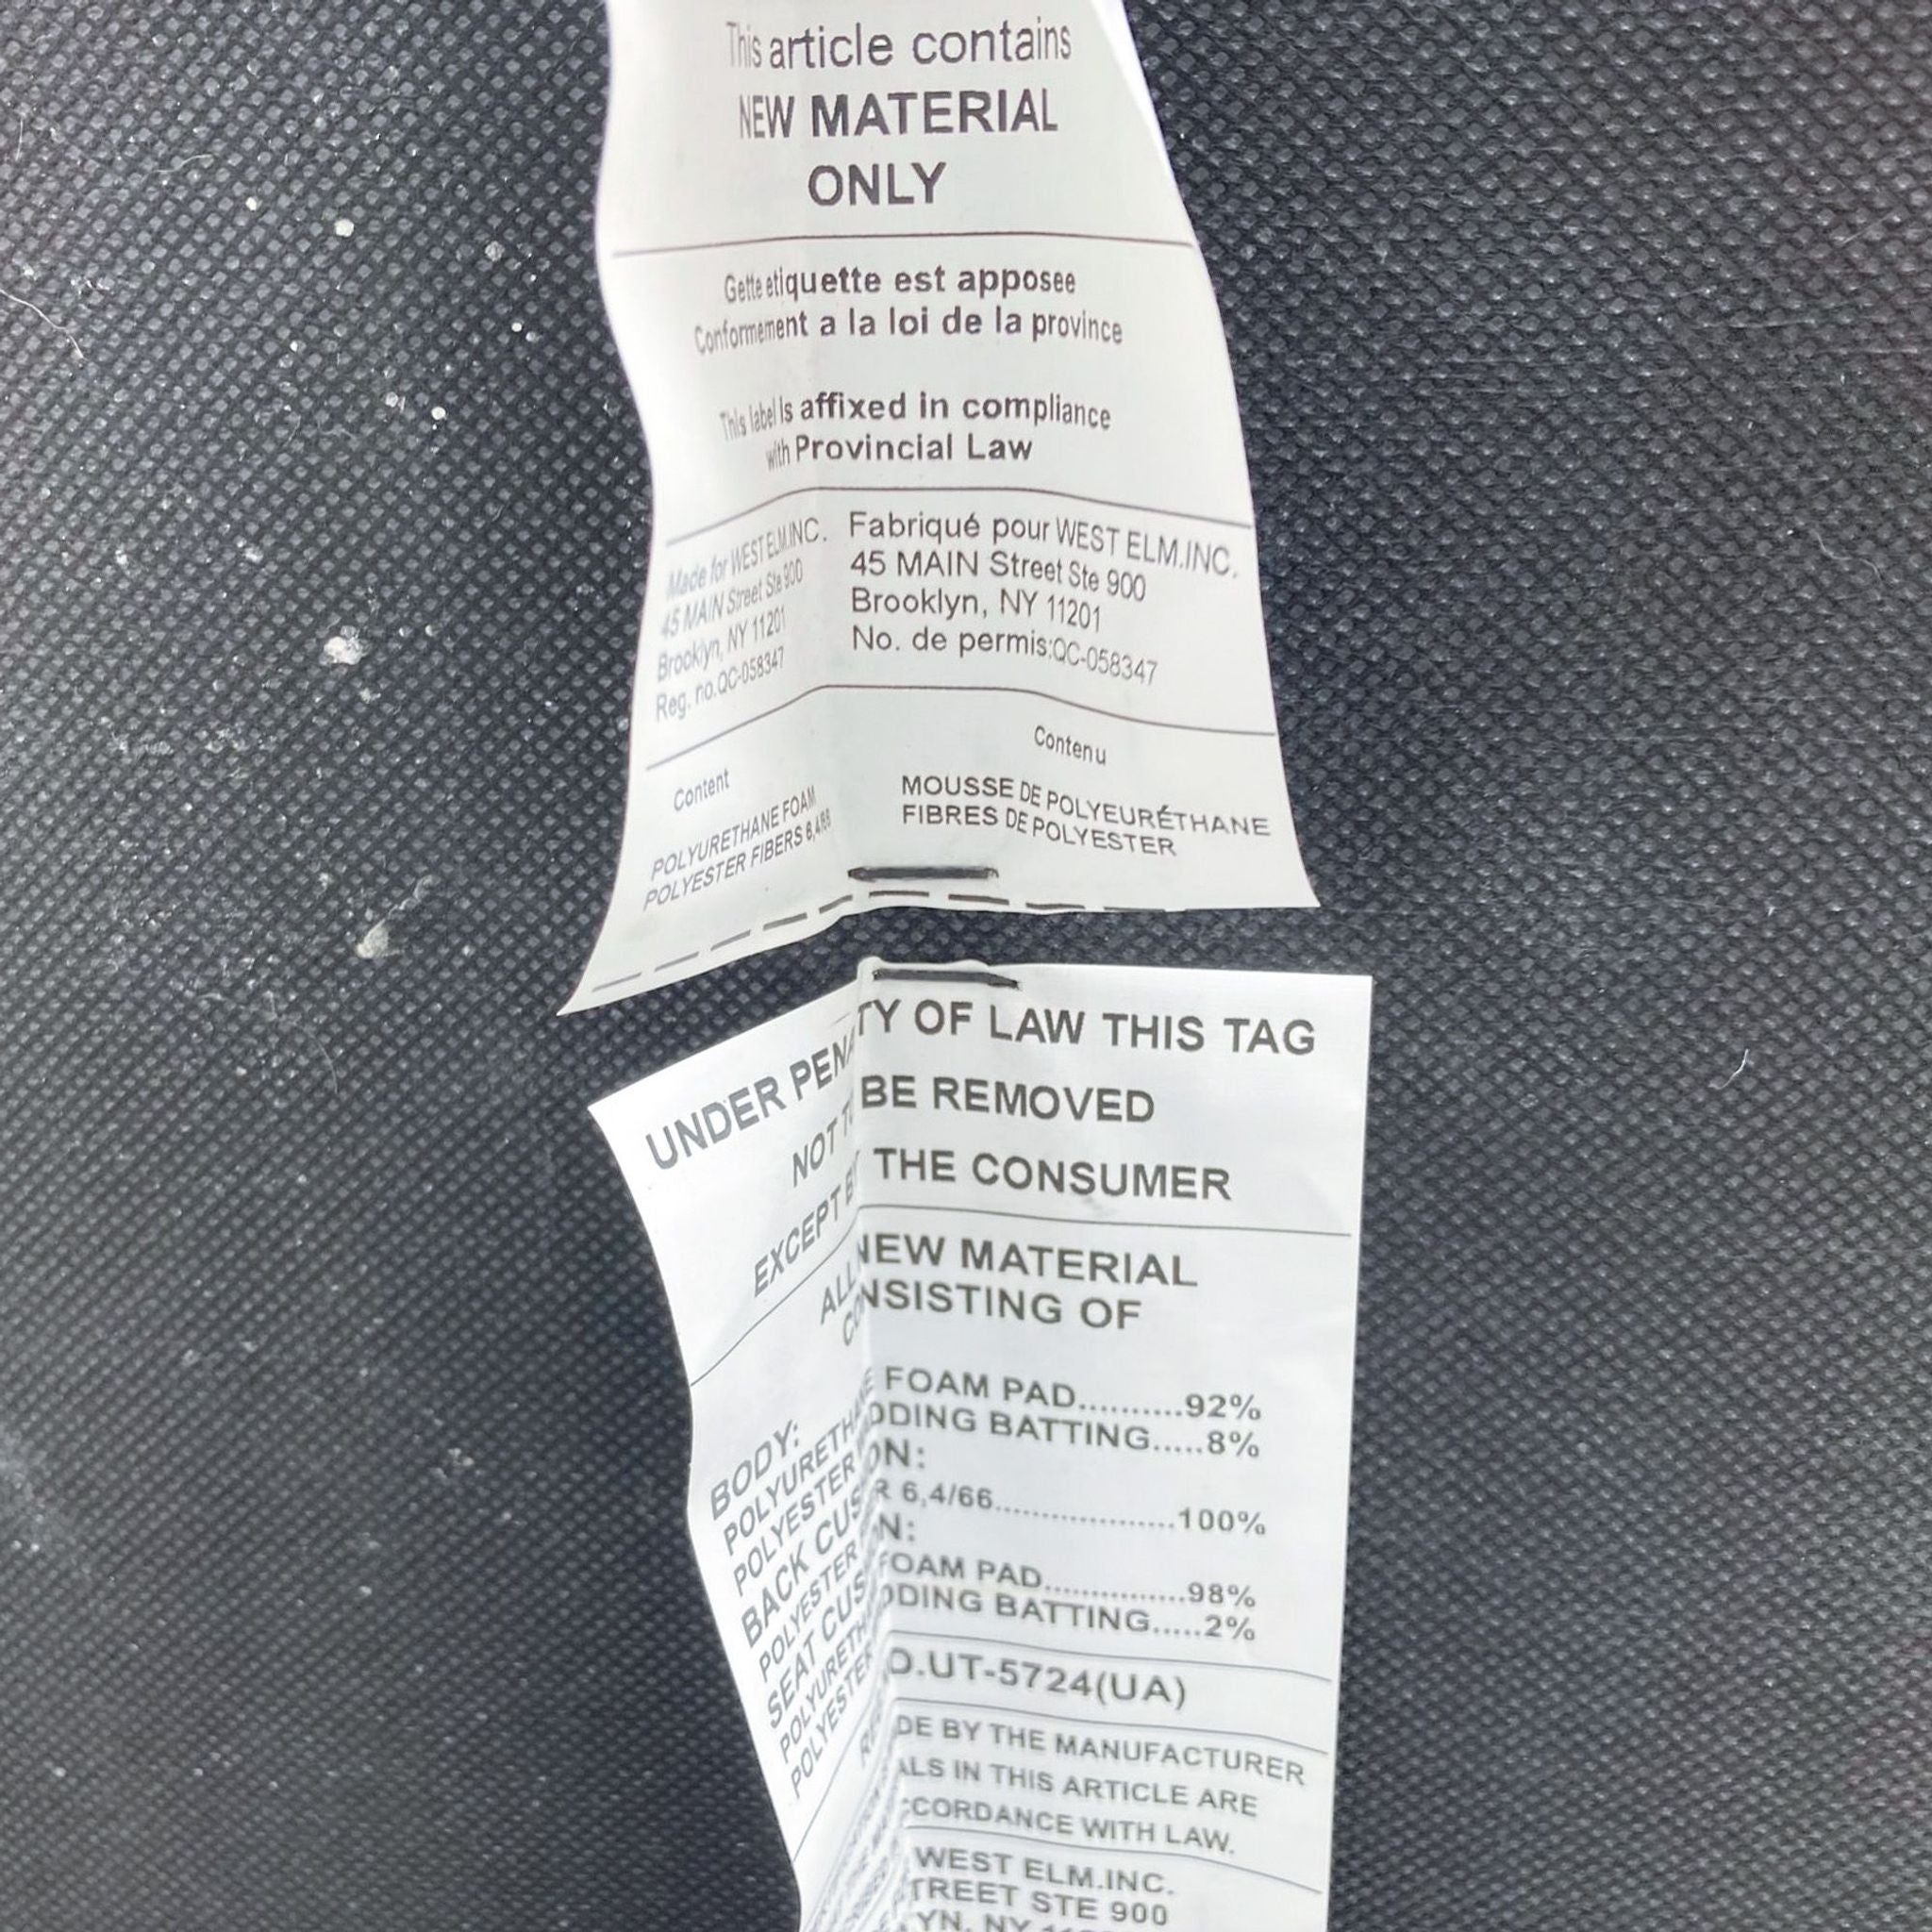 Torn law label tags from a West Elm modern gray heather weave fabric sofa with details about materials and brand information.